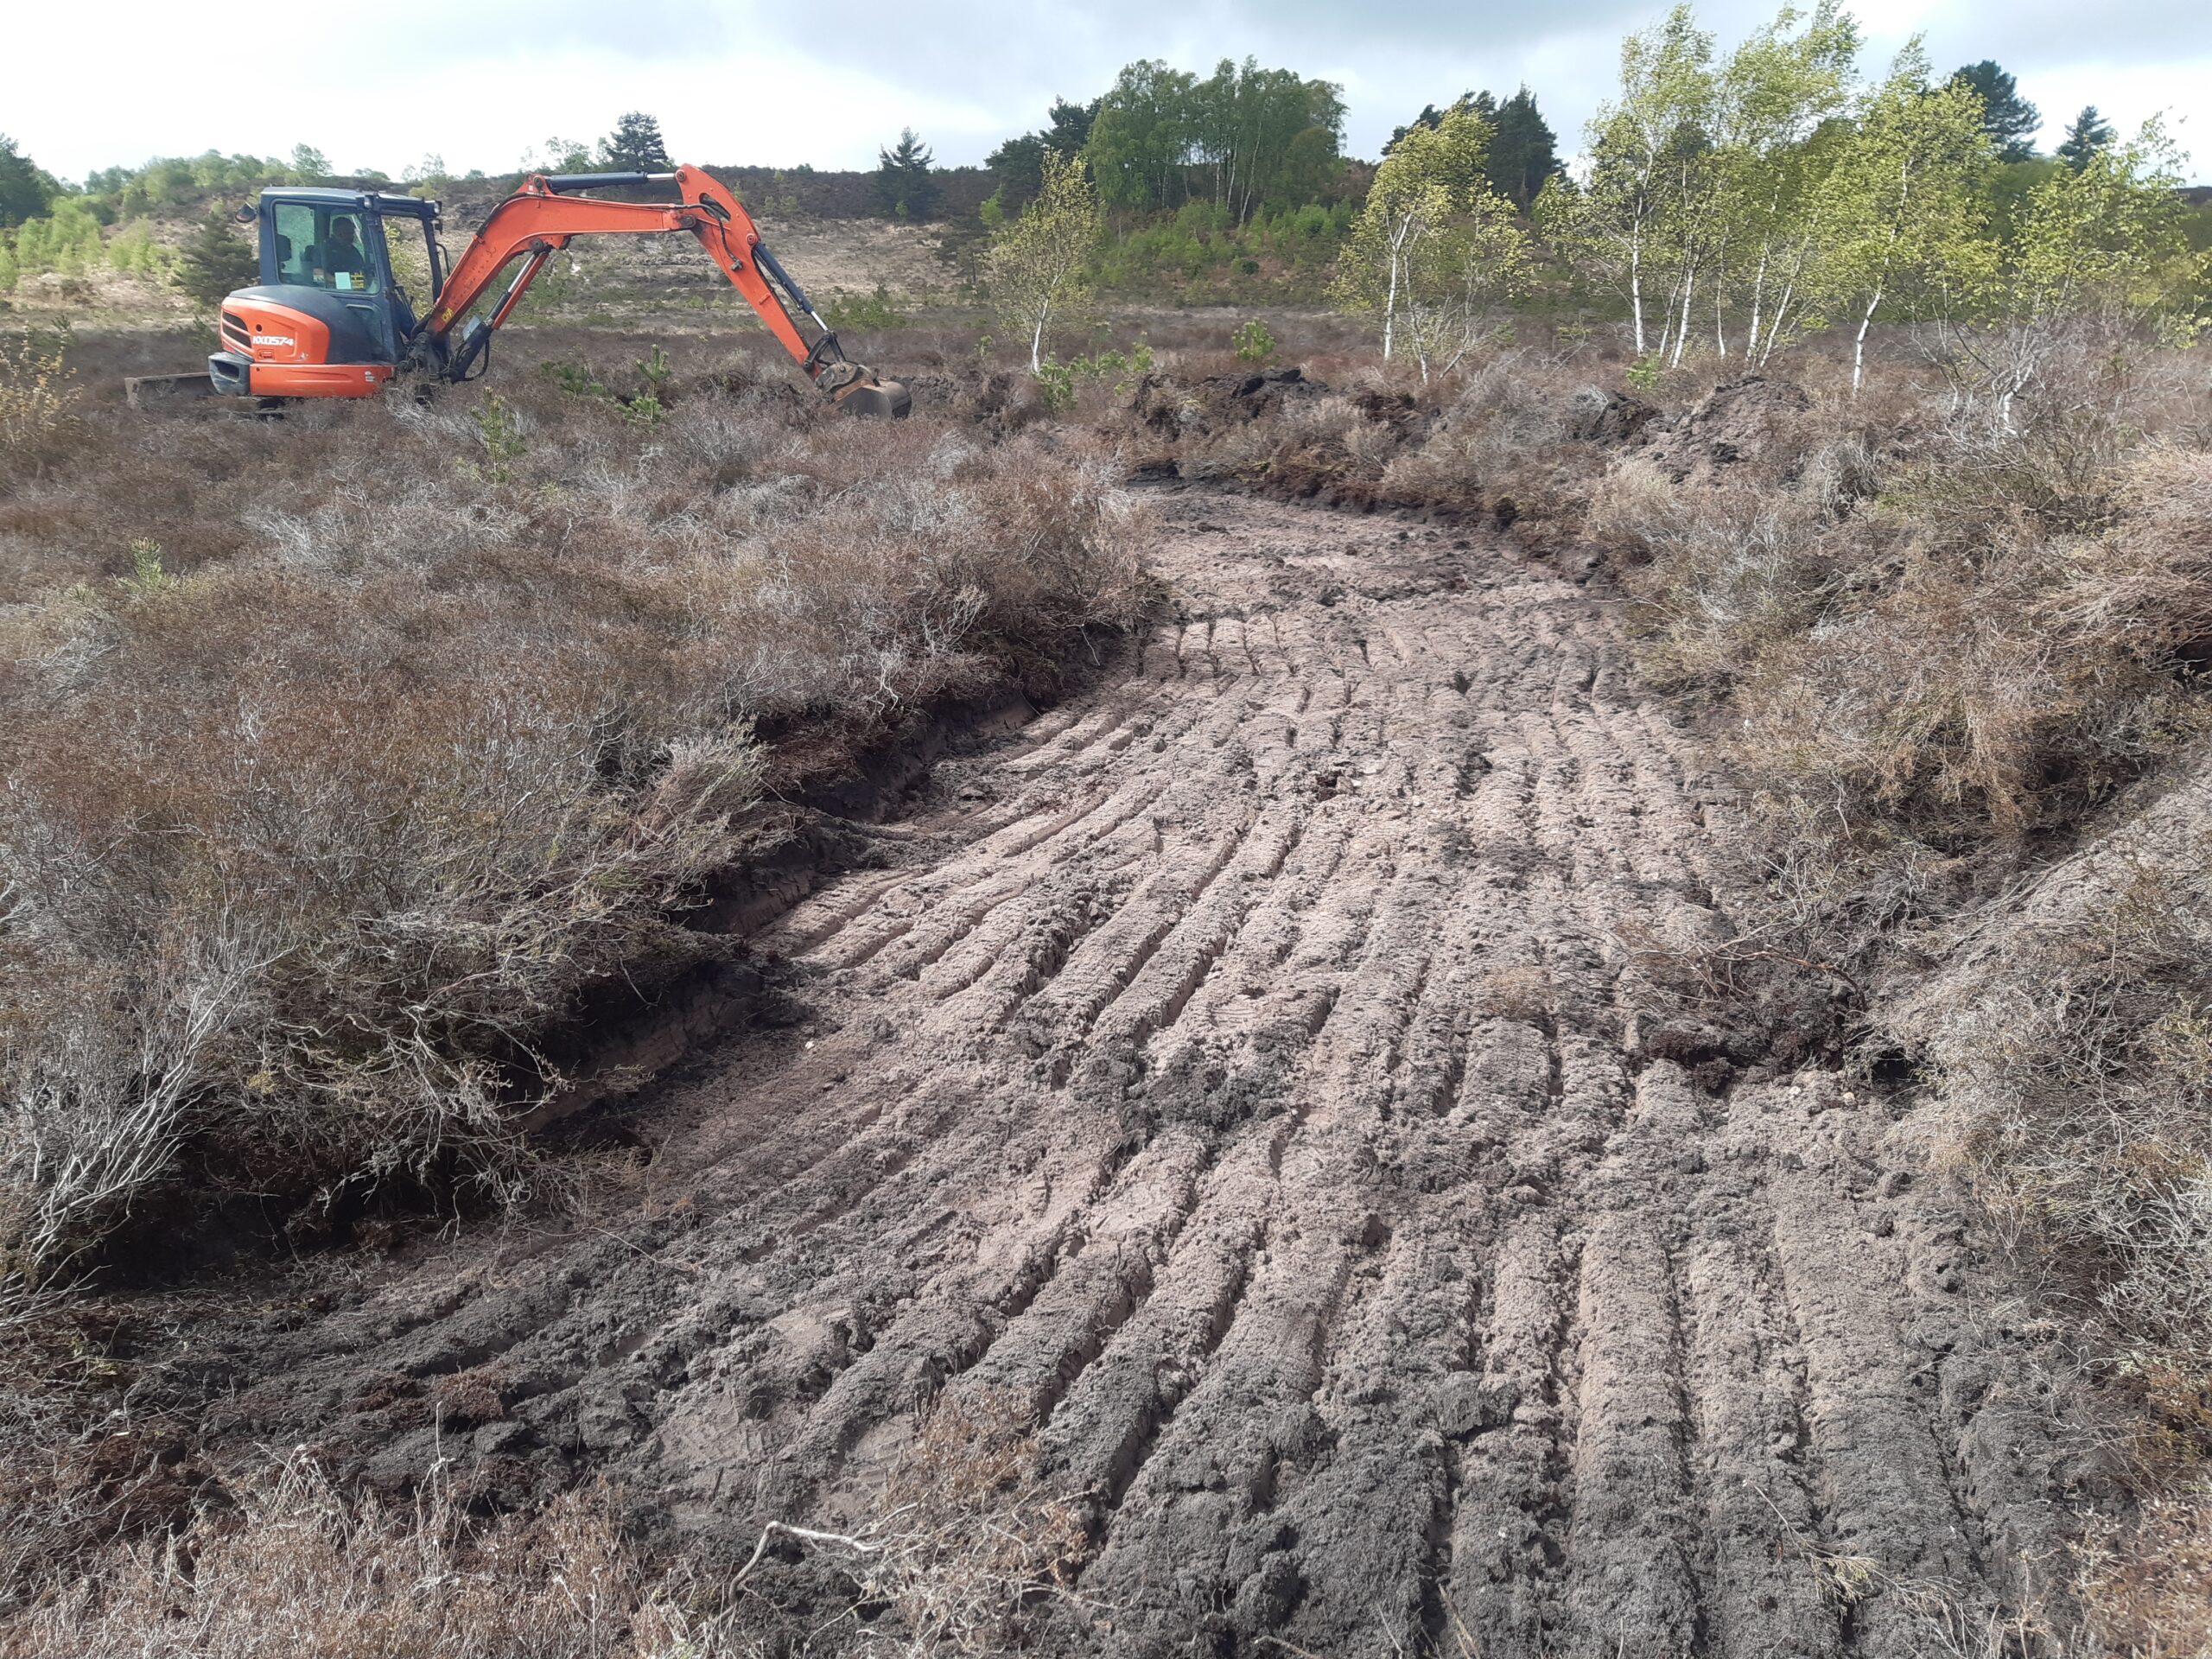 Scrapes will be constructed to help Dorset species. Picture: Steve Masters/Dorset Wildlife Trust